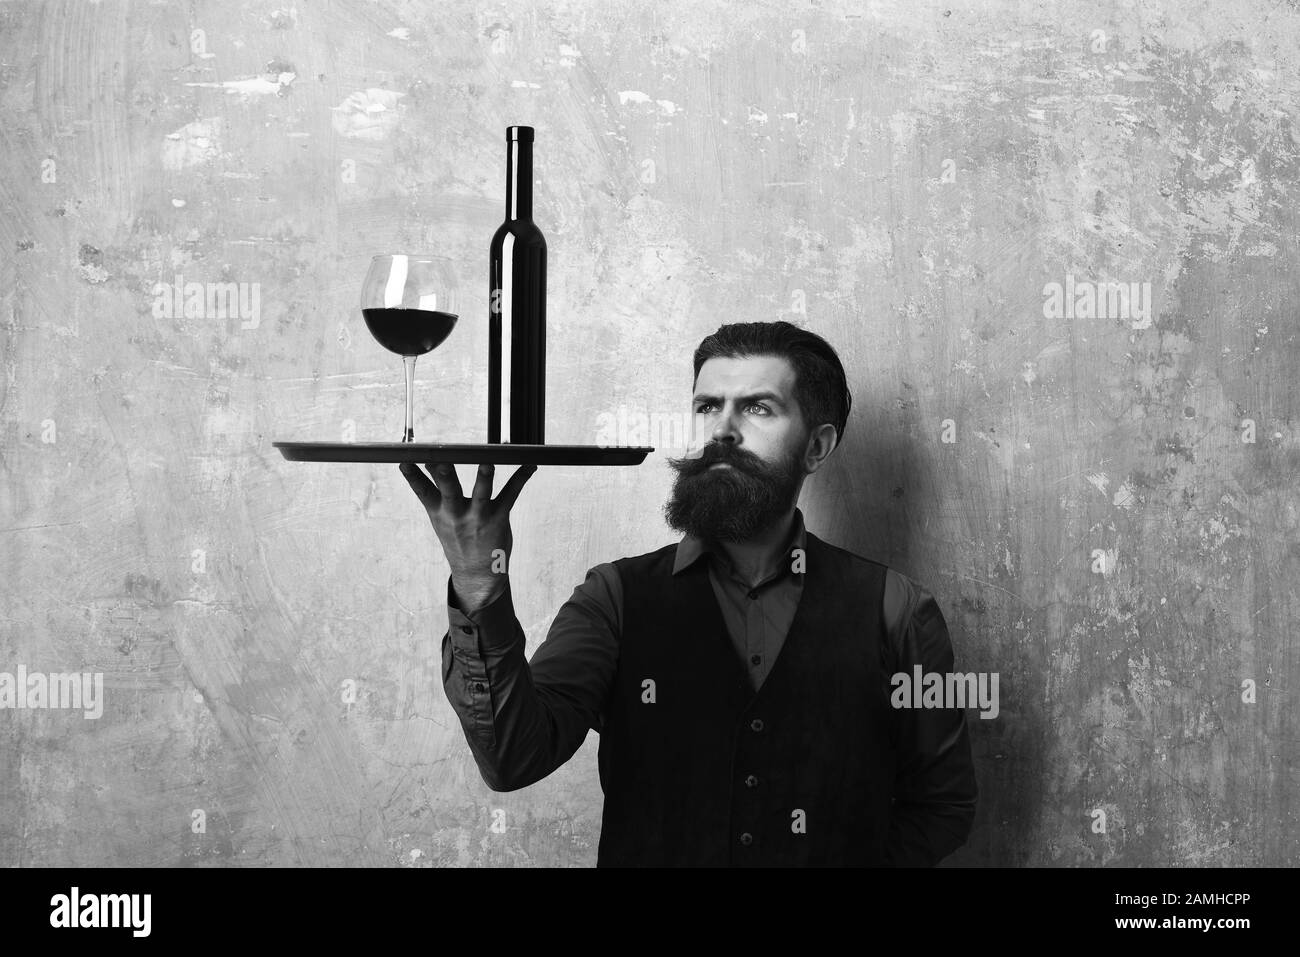 Service and catering concept. Man with beard and mustache holds wine on beige wall background. Waiter looks at glass and bottle of red wine on tray. Barman with curious face serves wine glass. Stock Photo